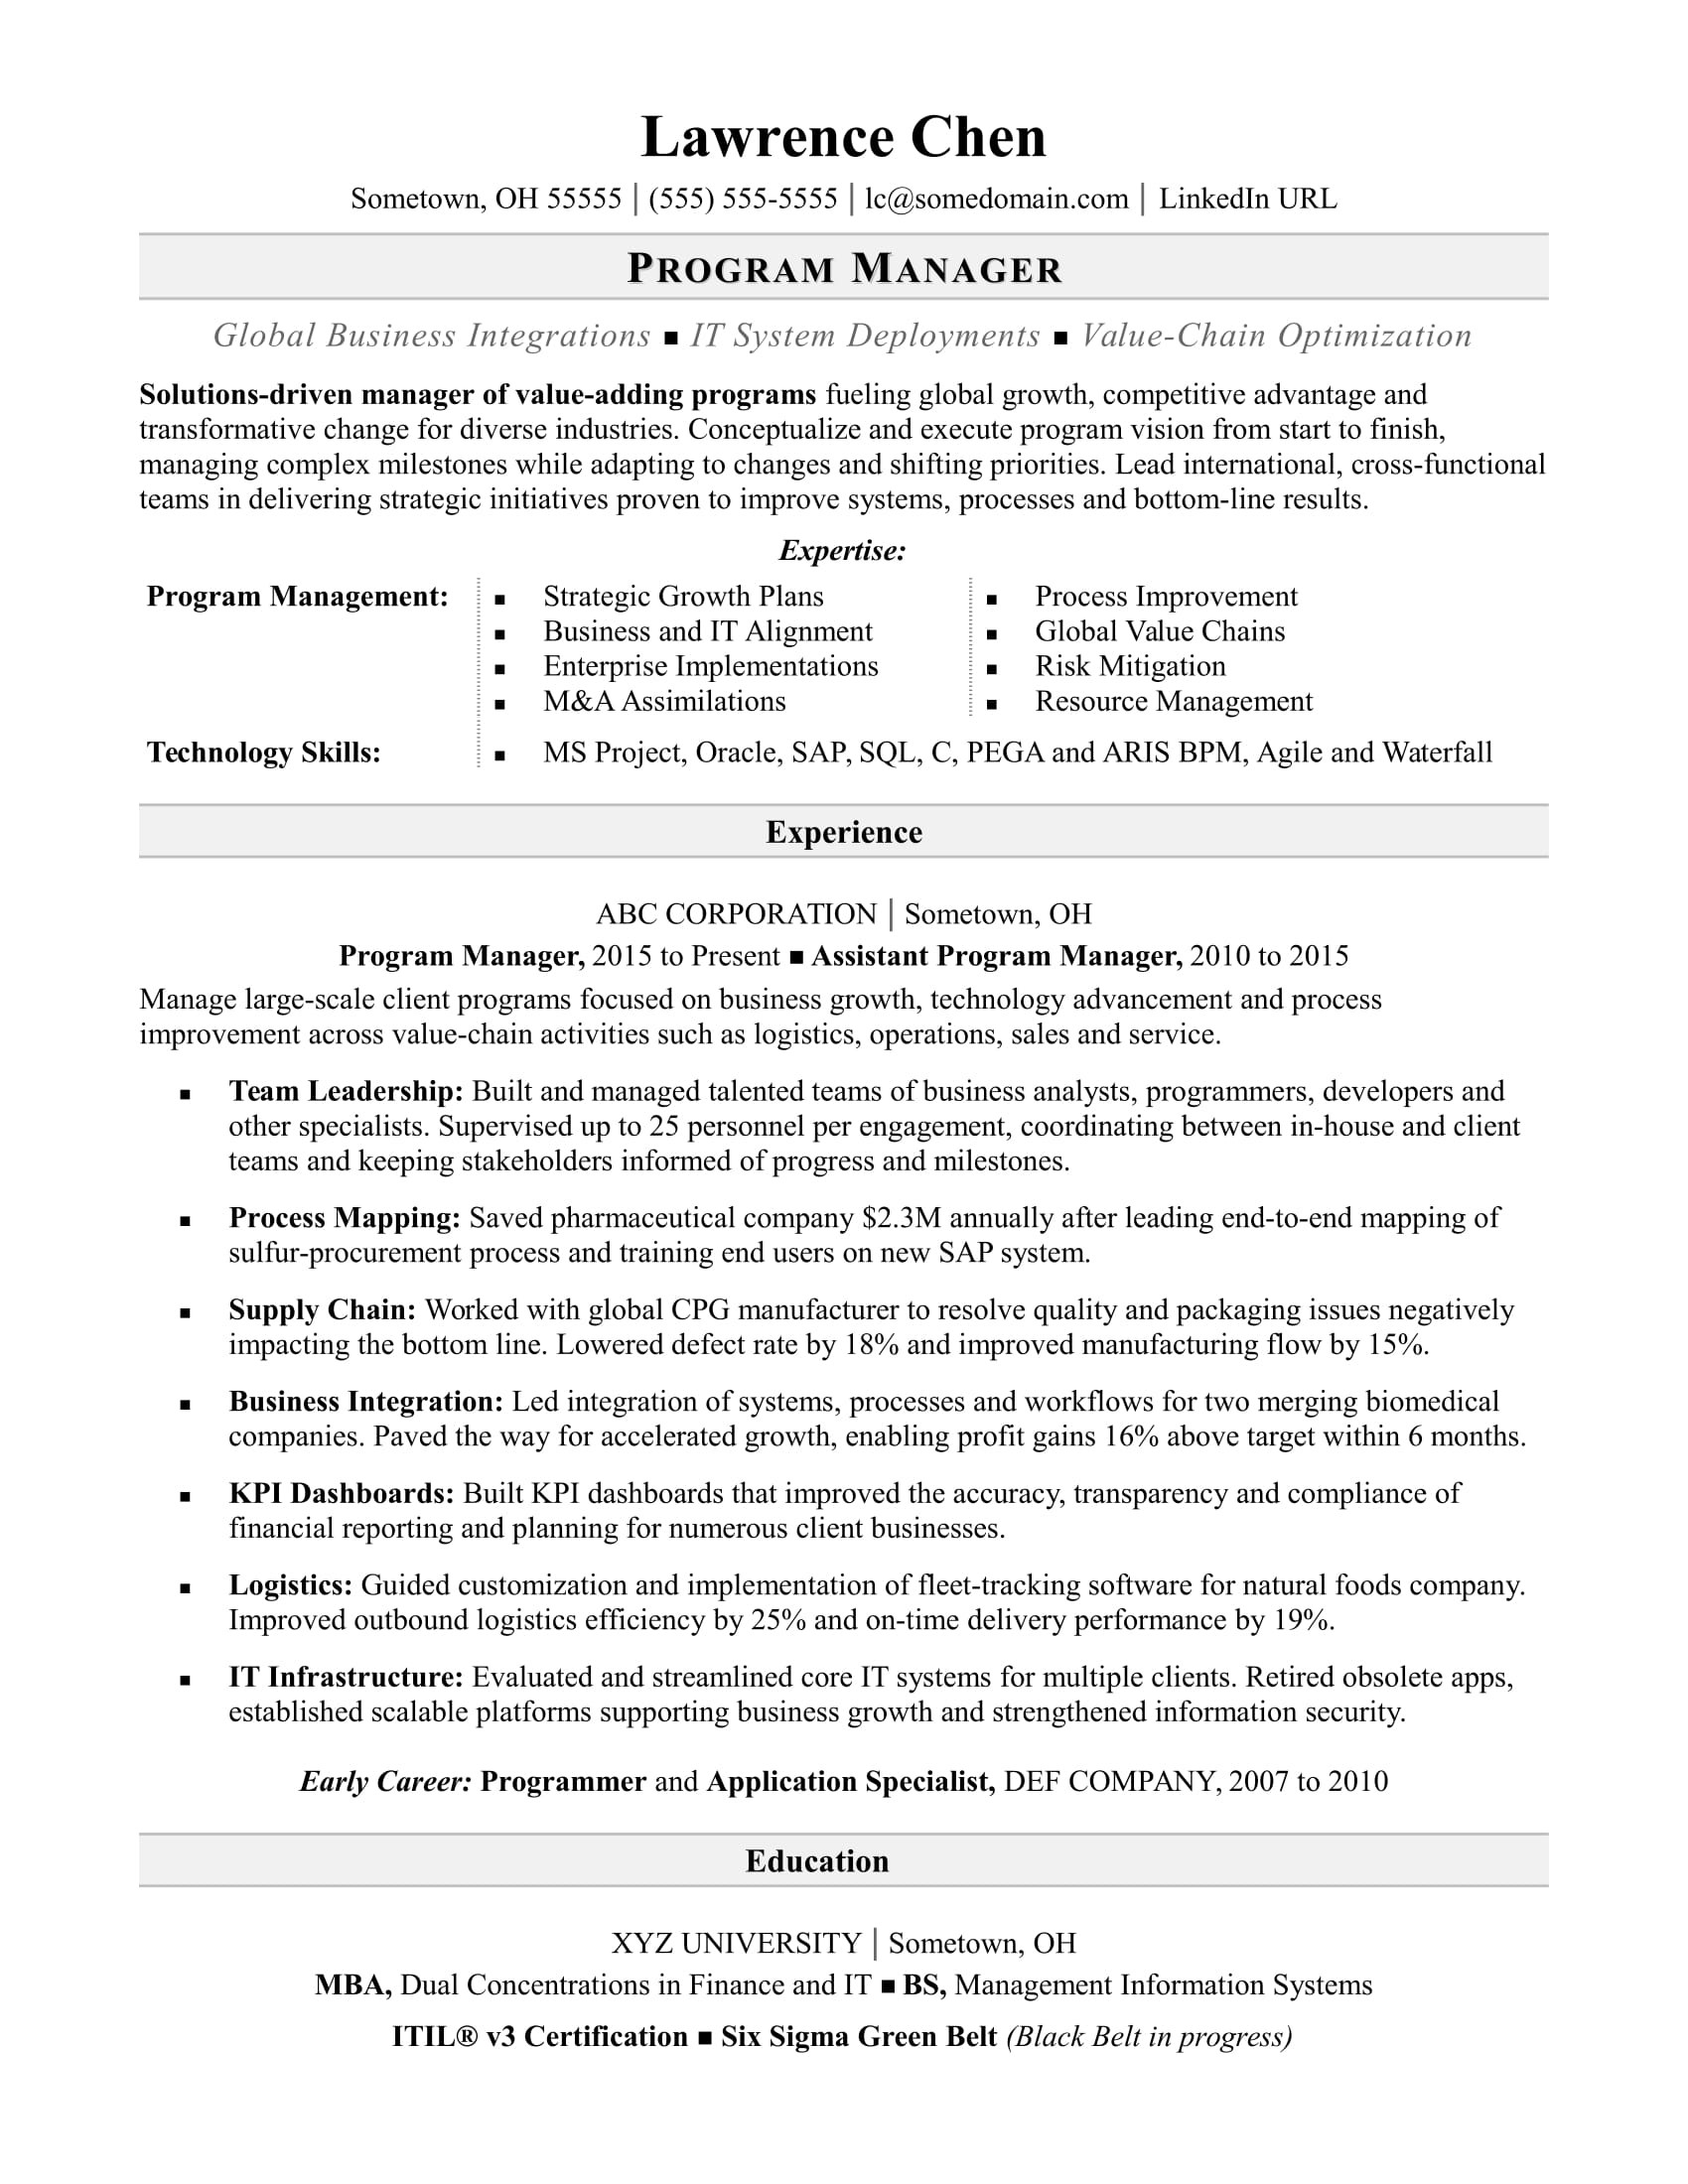 Sample Non It Project Manager Resume Program Manager Resume Monster.com